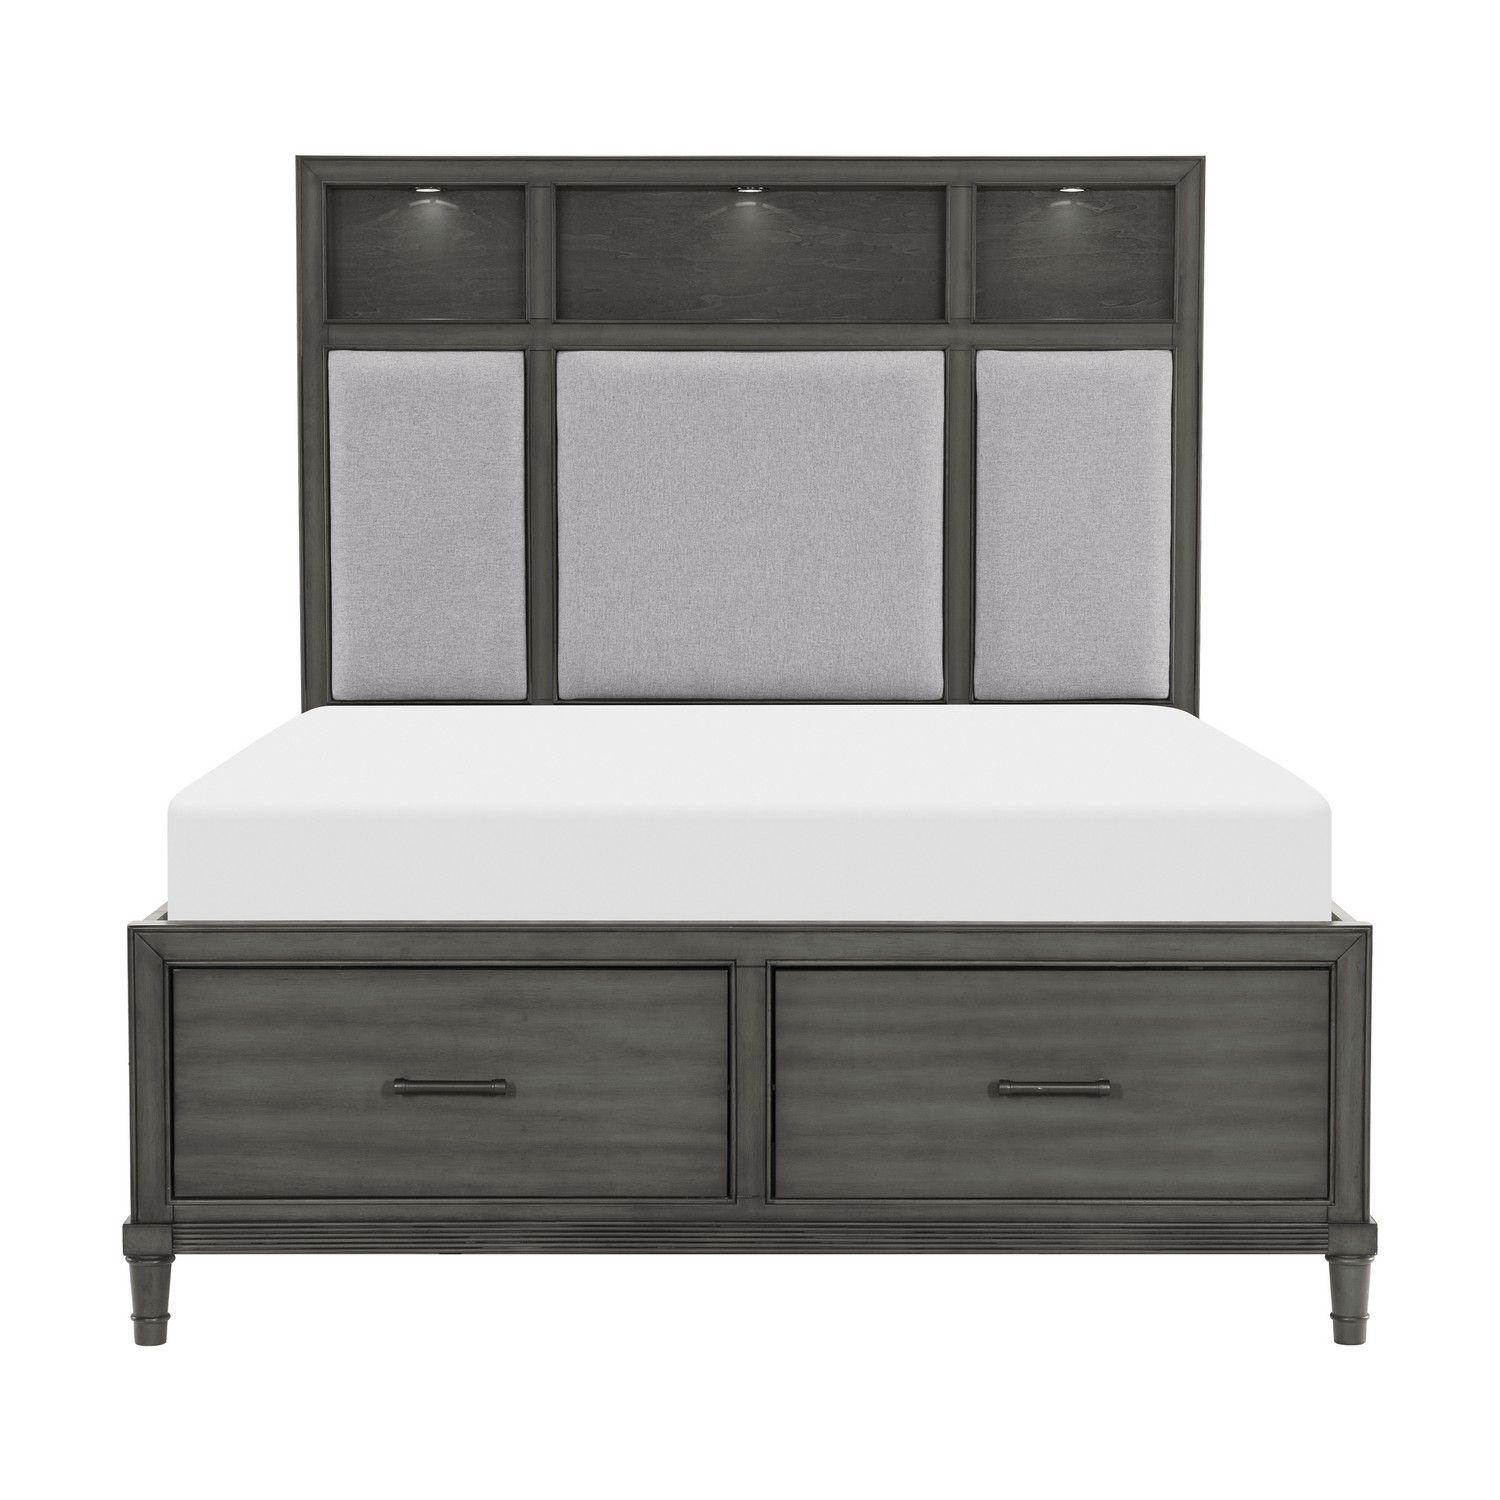 Homelegance Wittenberry Bed - Gray